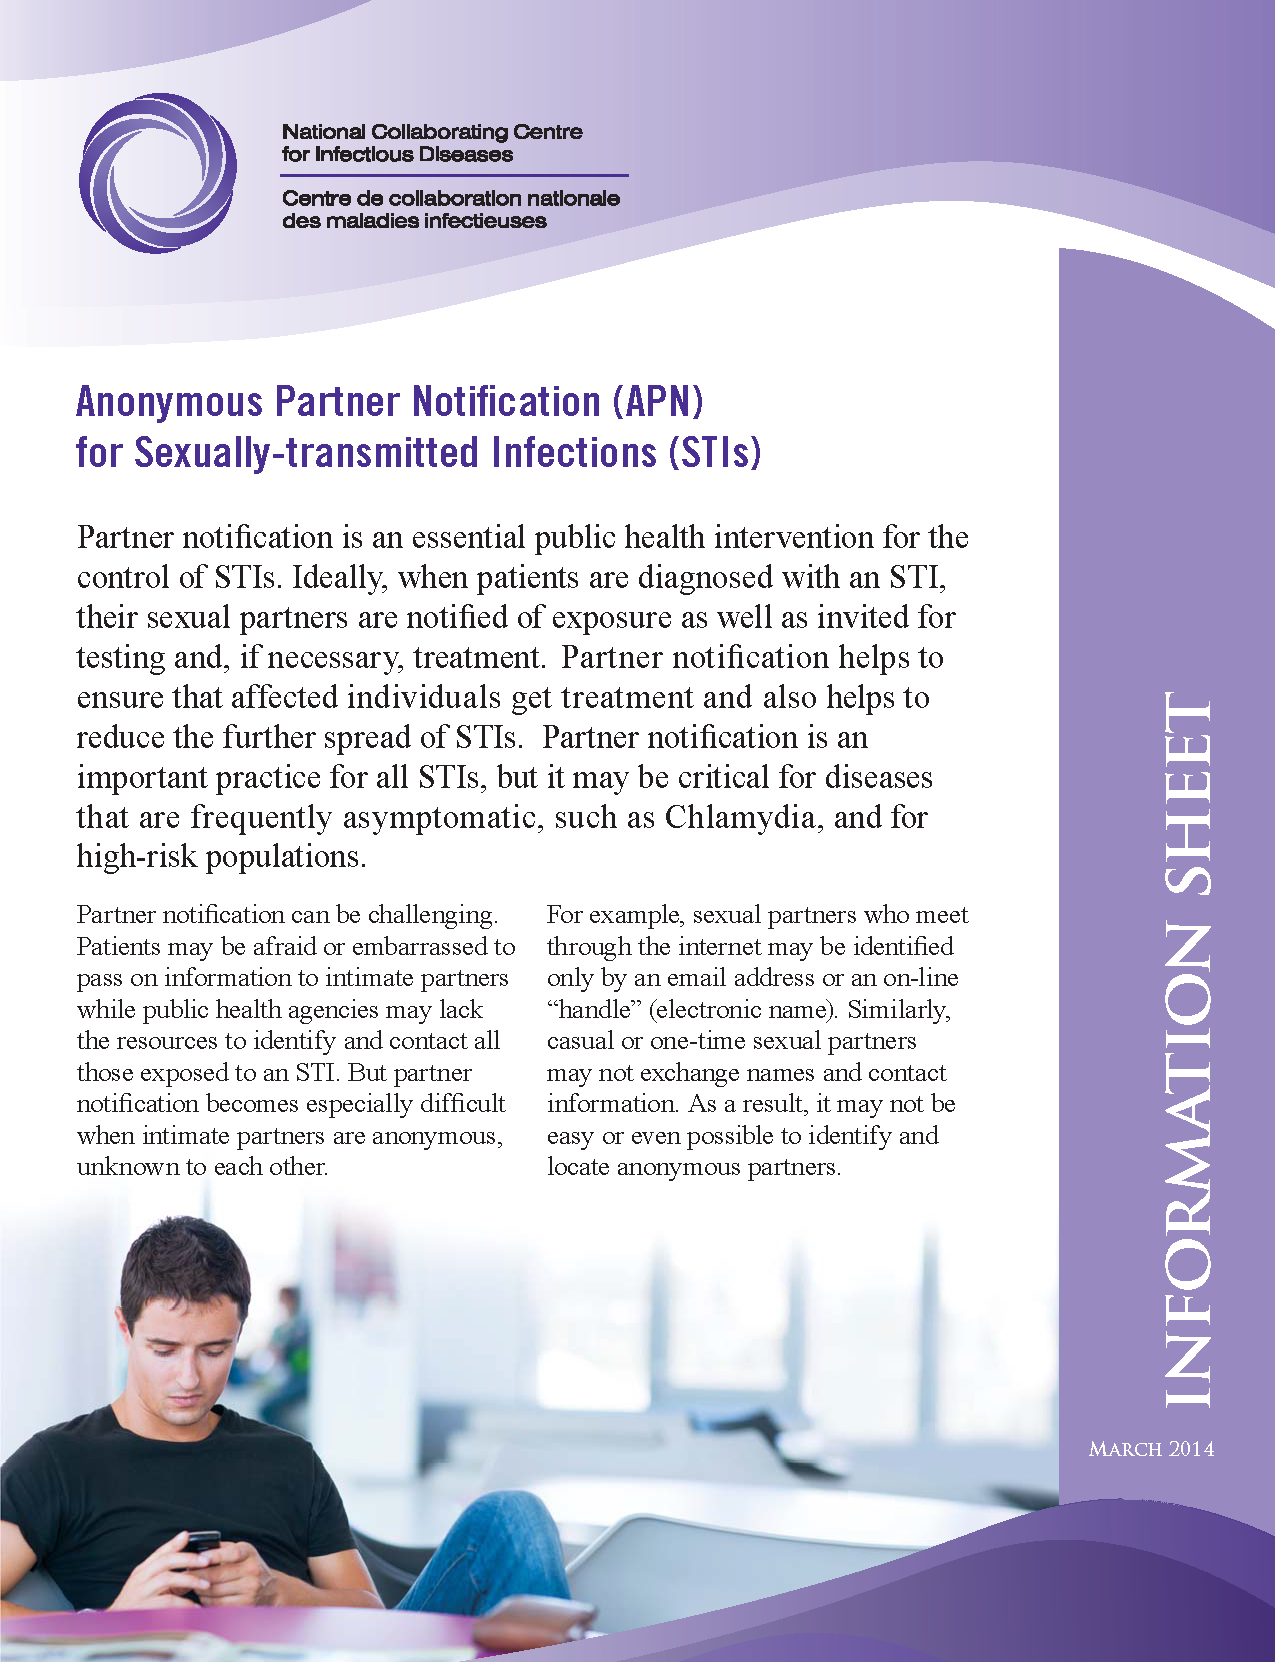 Anonymous Partner Notification for Sexually-transmitted Infections: Information Sheet